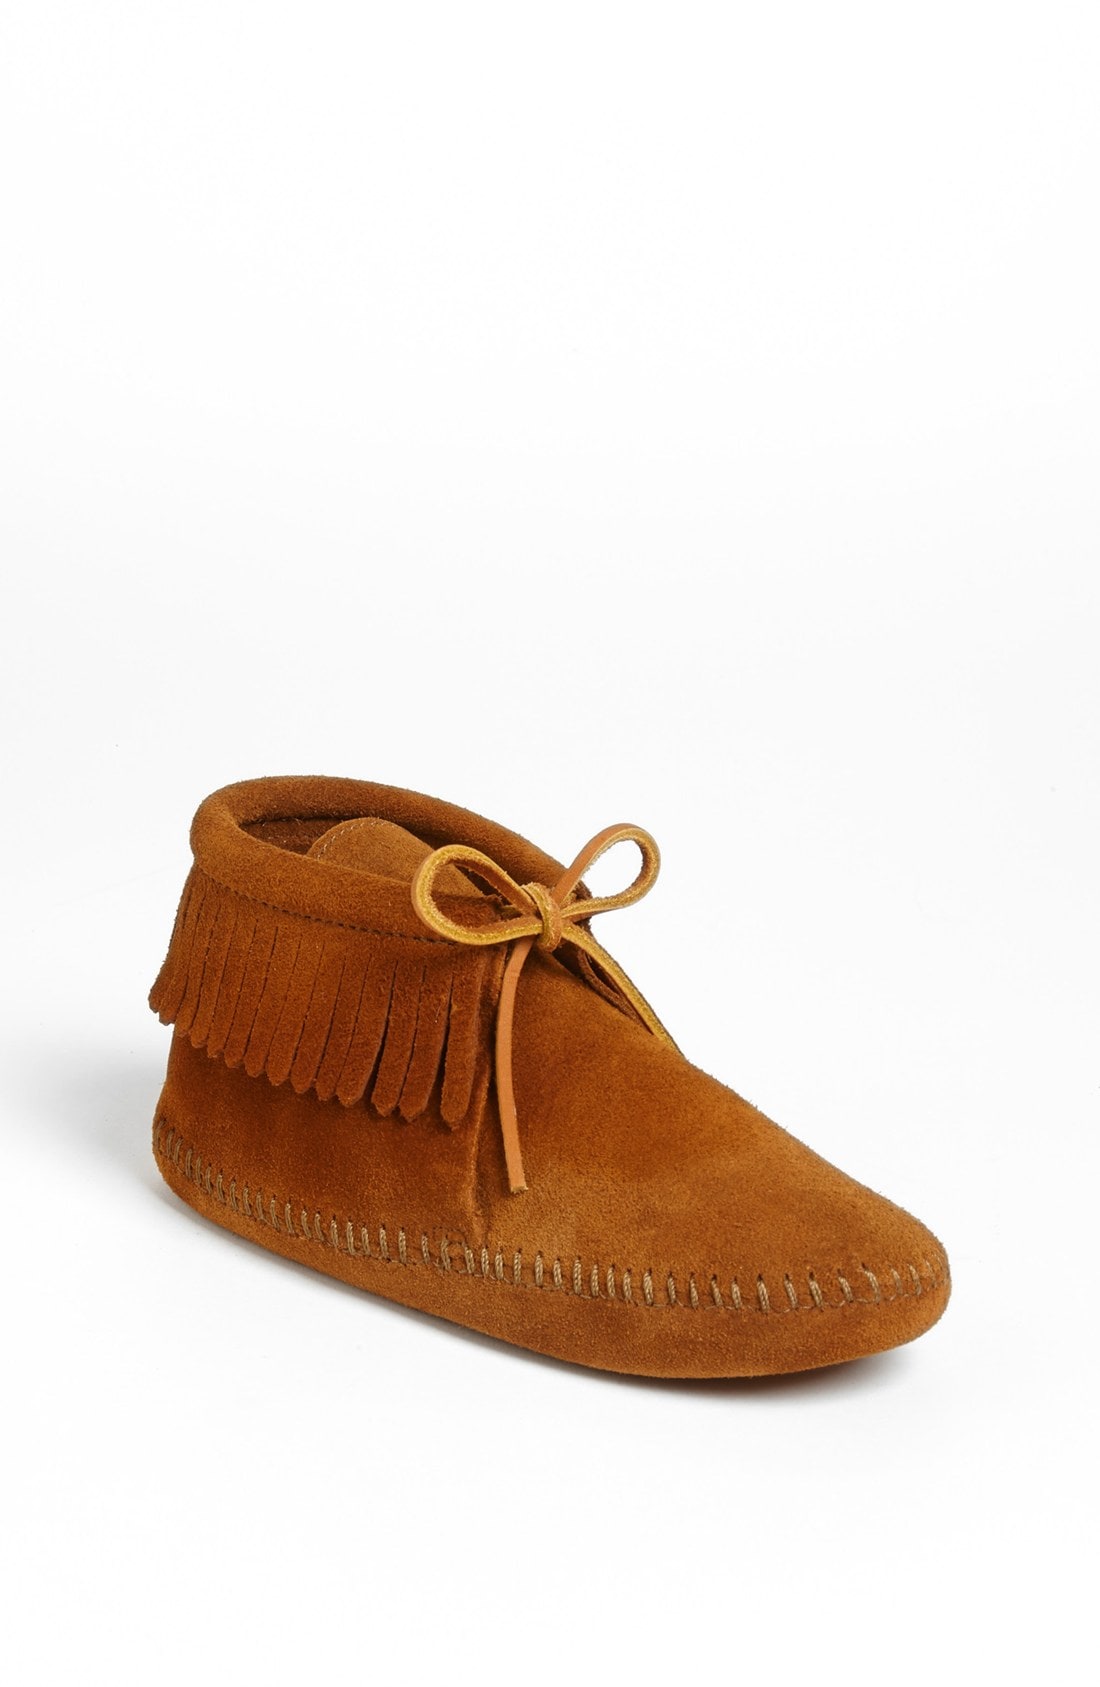 moccasin boots | Nordstrom